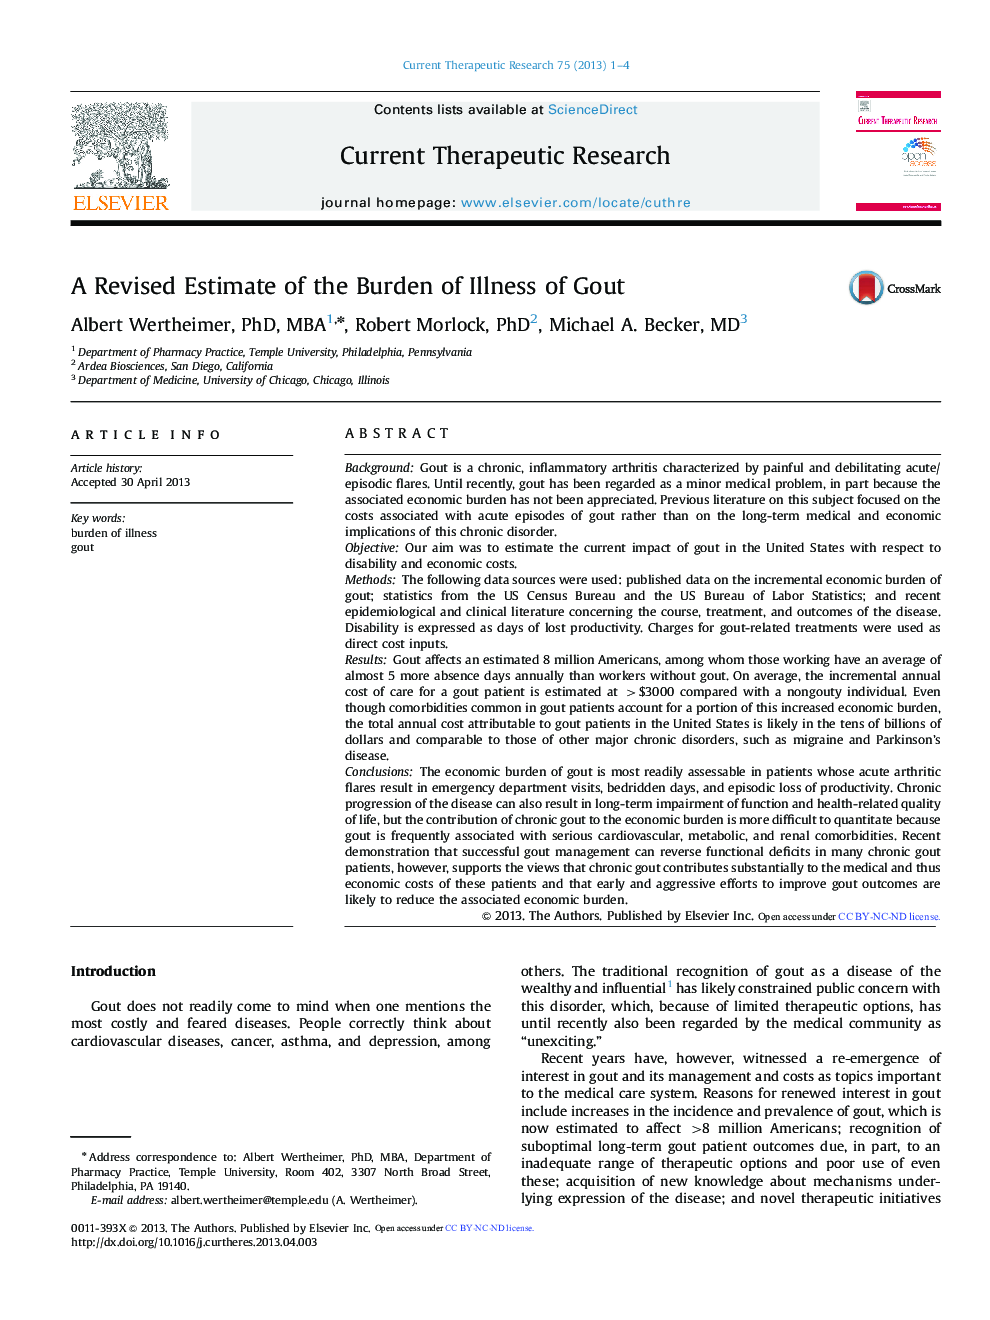 A Revised Estimate of the Burden of Illness of Gout